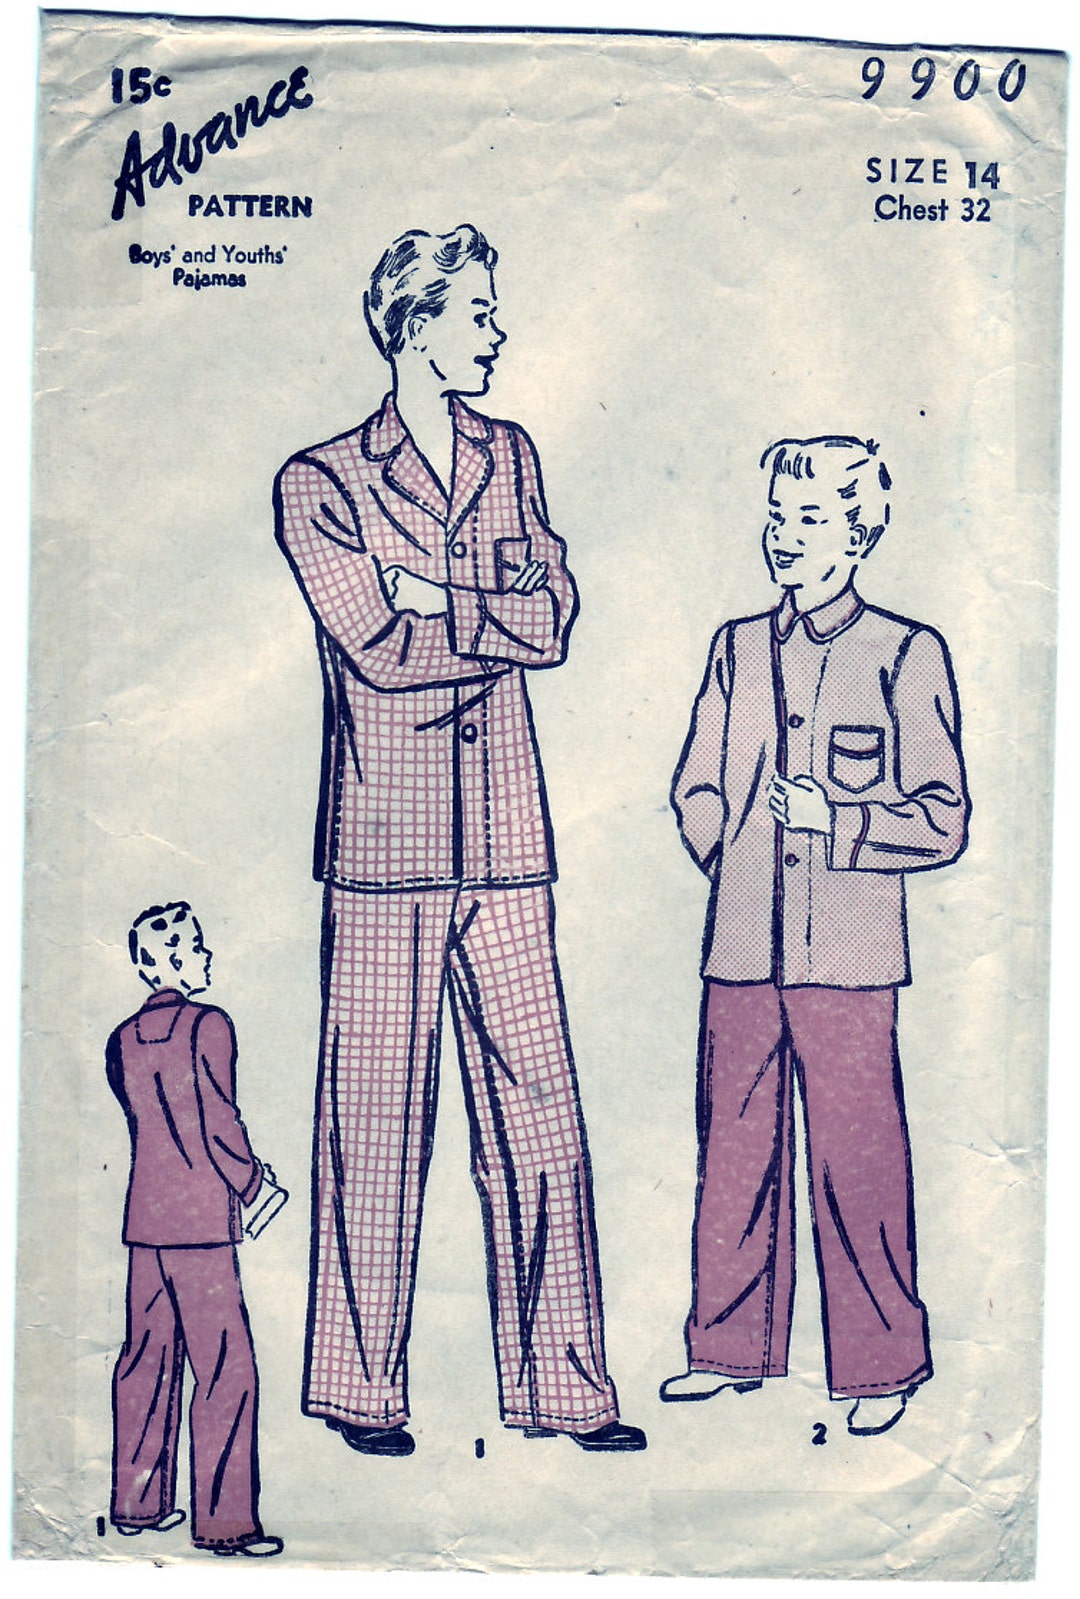 Vintage 1951 Advance 9900 Sewing Pattern Boys' and - Etsy